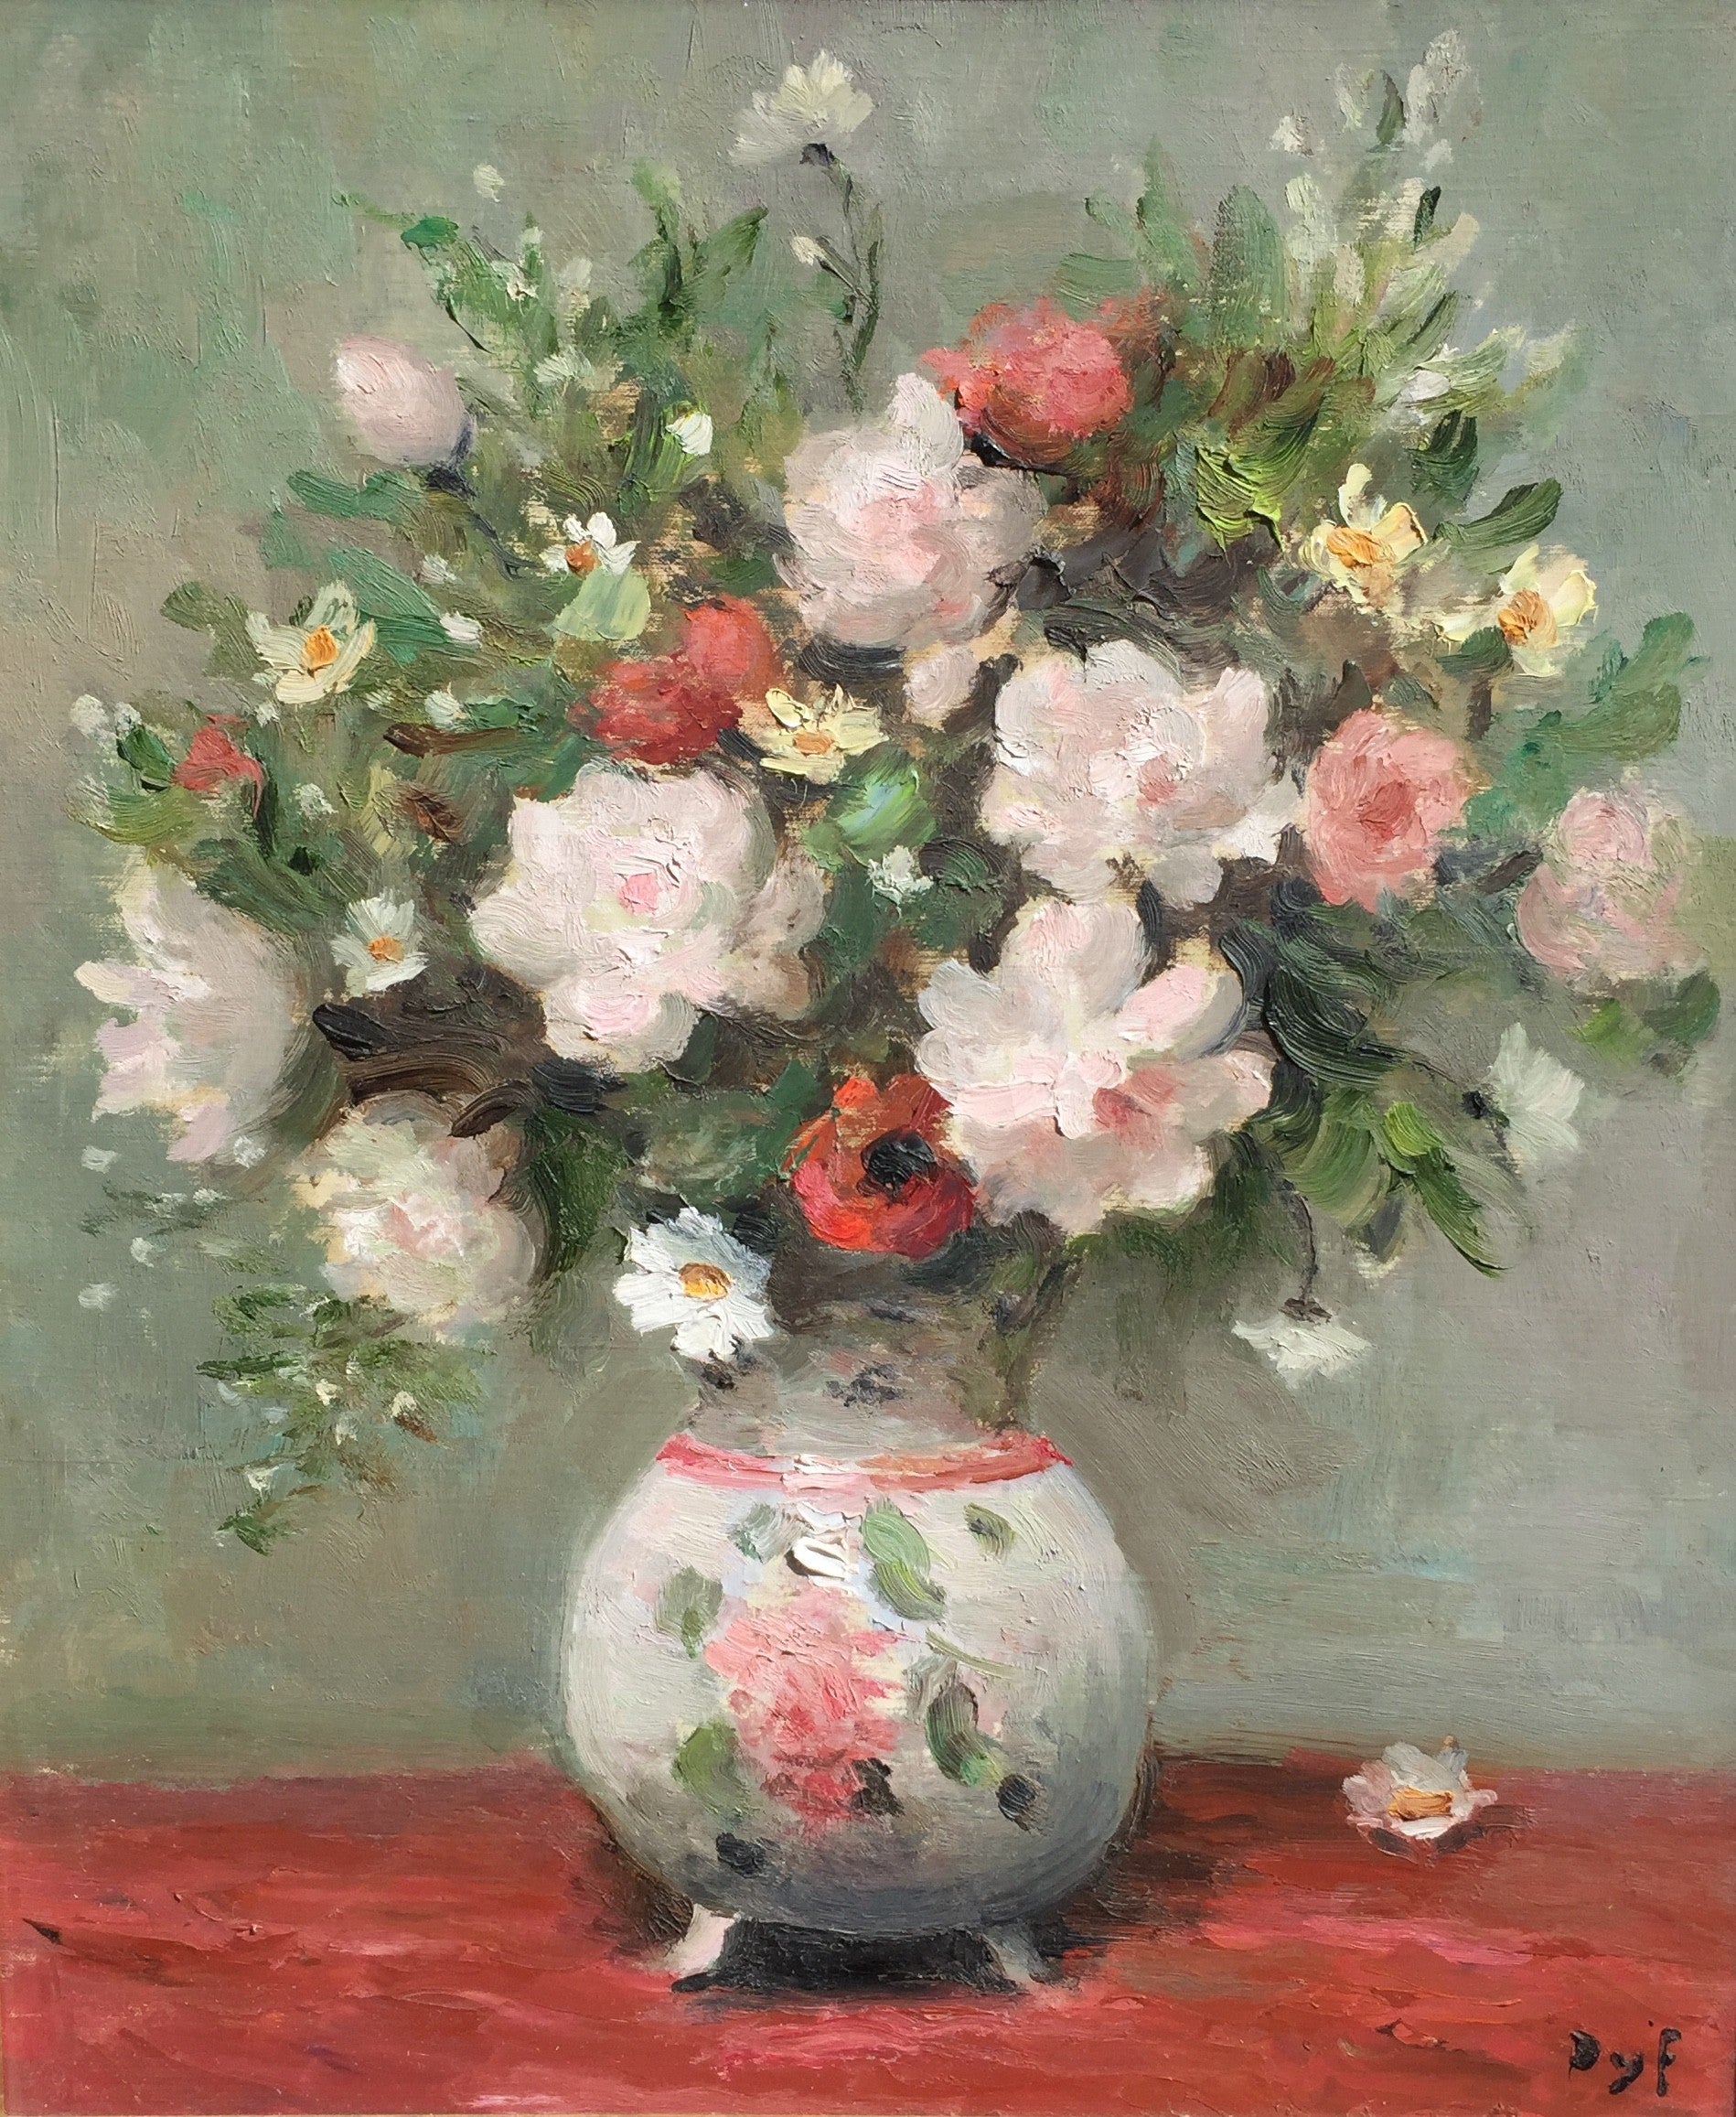 Marcel Dyf - Roses and Poppies at 1stDibs